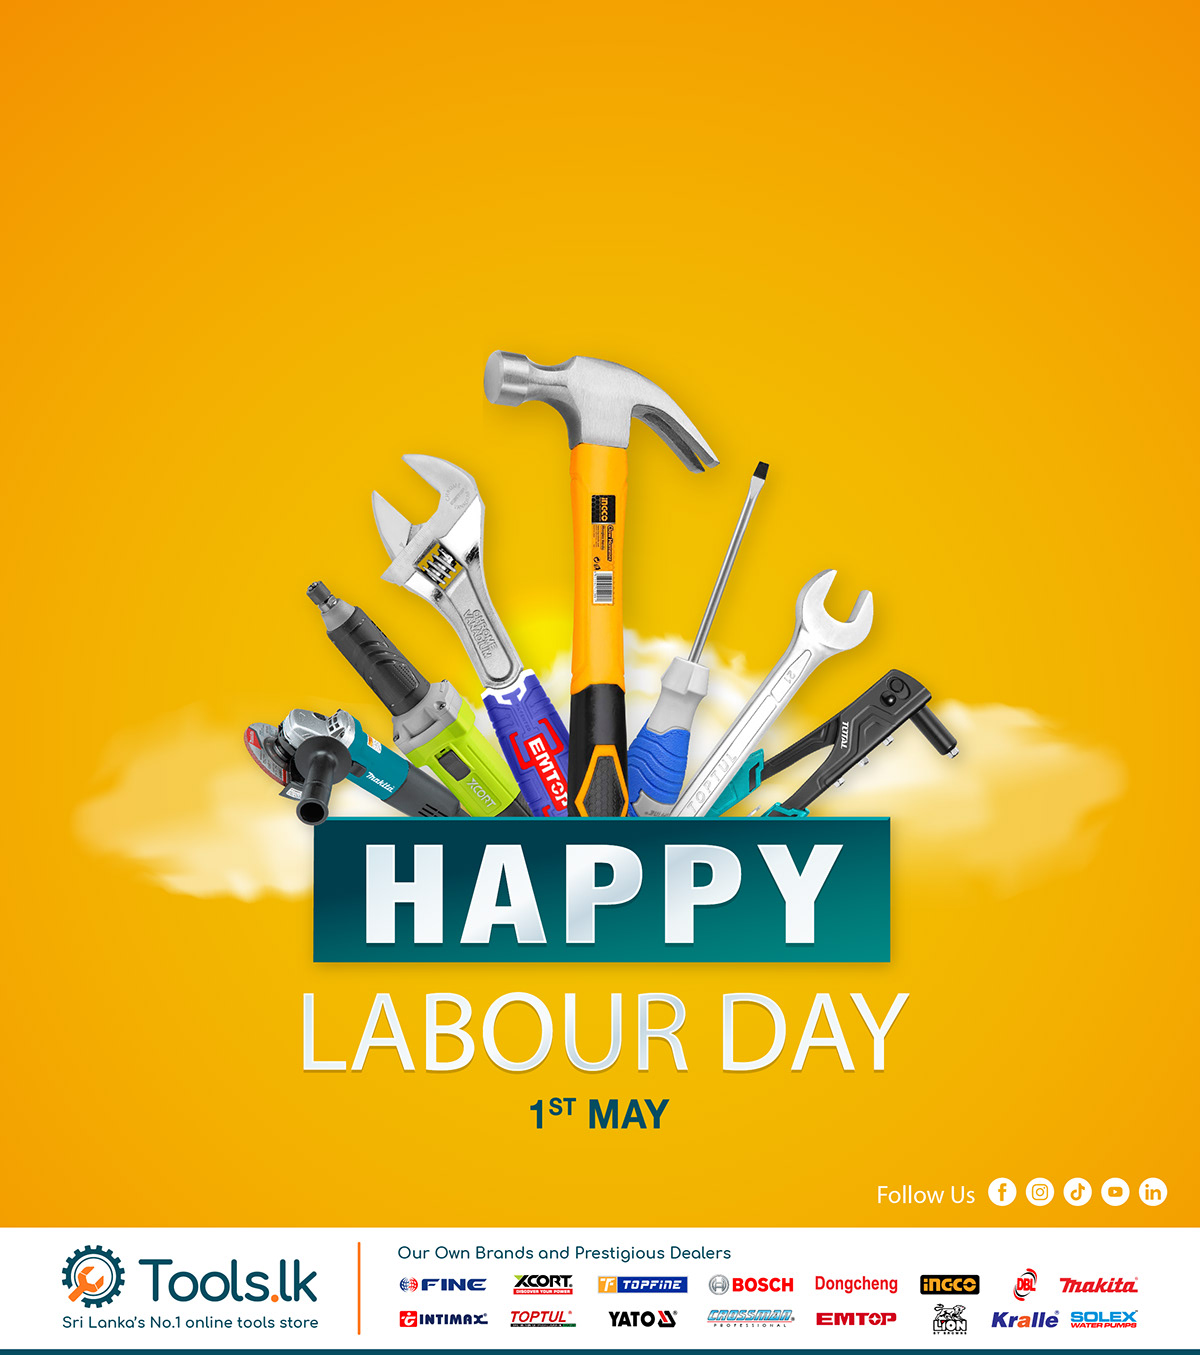 ads Advertising  Hand tools happy Happy Labour Day Labour 1st may Labor Day Social media post Workers